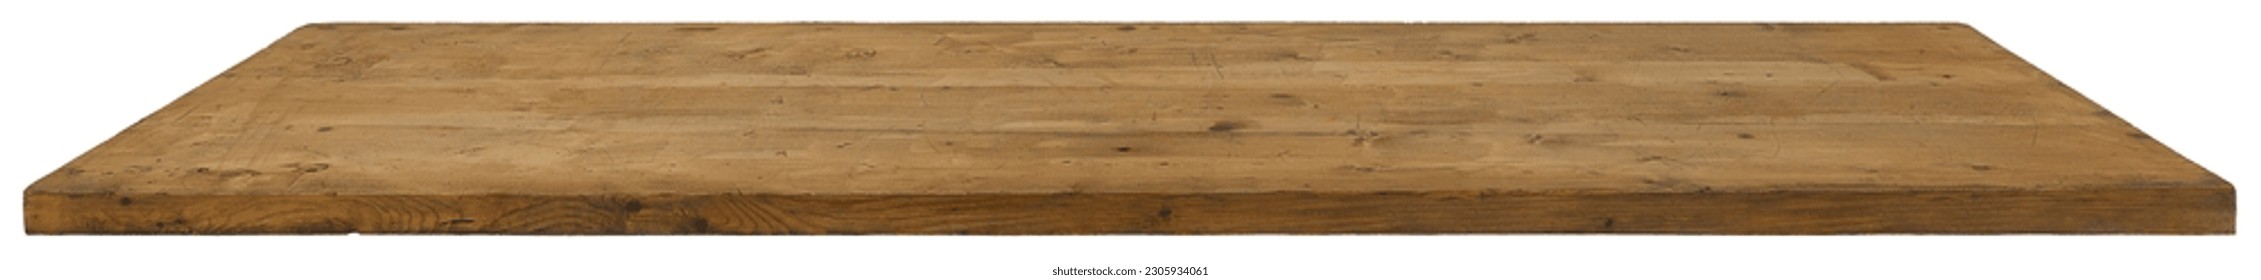 Wooden table surface. Blank Front view isolated on white background with clipping path. Useful as product display. - Shutterstock ID 2305934061